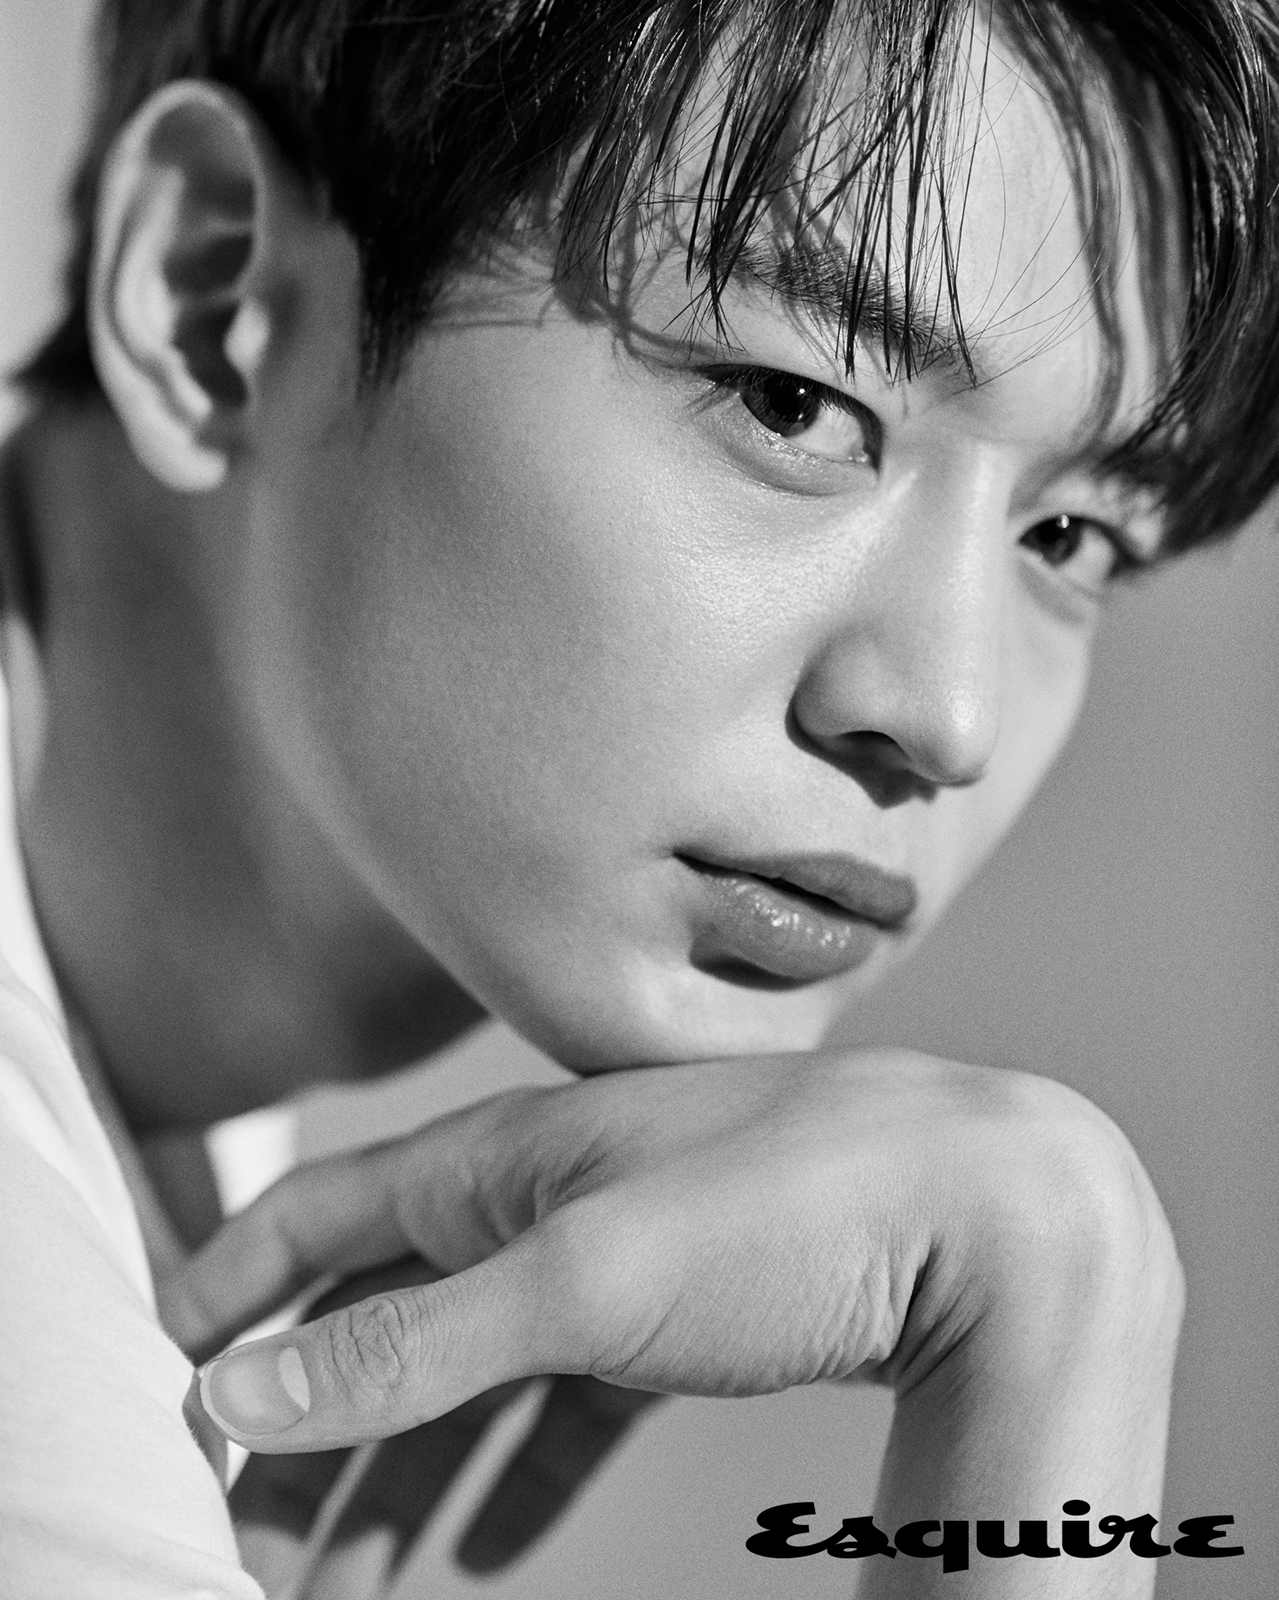 <p>With this sensational picture of the black and white tone, Choi Min-ho shows intense charm with only deeply eyes without big movements and no change in pose, diverging a selfish atmosphere I caught my eyes.</p><p>Especially Choi Min-ho will show incredible concentration ability when shooting starts even though it intends to be relaxed at the shooting site, show off a nice visual for each cut and draw out the elasticity of the staff I also did.</p><p>In an interview performed together with the shooting of images, Choi Min-ho said, It was really lucky to be able to shoot with Kim Jee-woon director, said Jin-Roh : The Wolf Brigade and the impression of the appearance and the work-behind talked about a variety of frank story, such as impression which came to the 10th anniversary of SHINee as well as Balhototum.</p><p>Choi Min-ho plays the role of Tsukgeides core crew member Kim Choljin at the coming movie Jin-Roh: The Wolf Brigade (director Kim Jee-woon) and presents a new appearance with a new appearance, I am planning to meet the audiences, expressing expectations.</p>